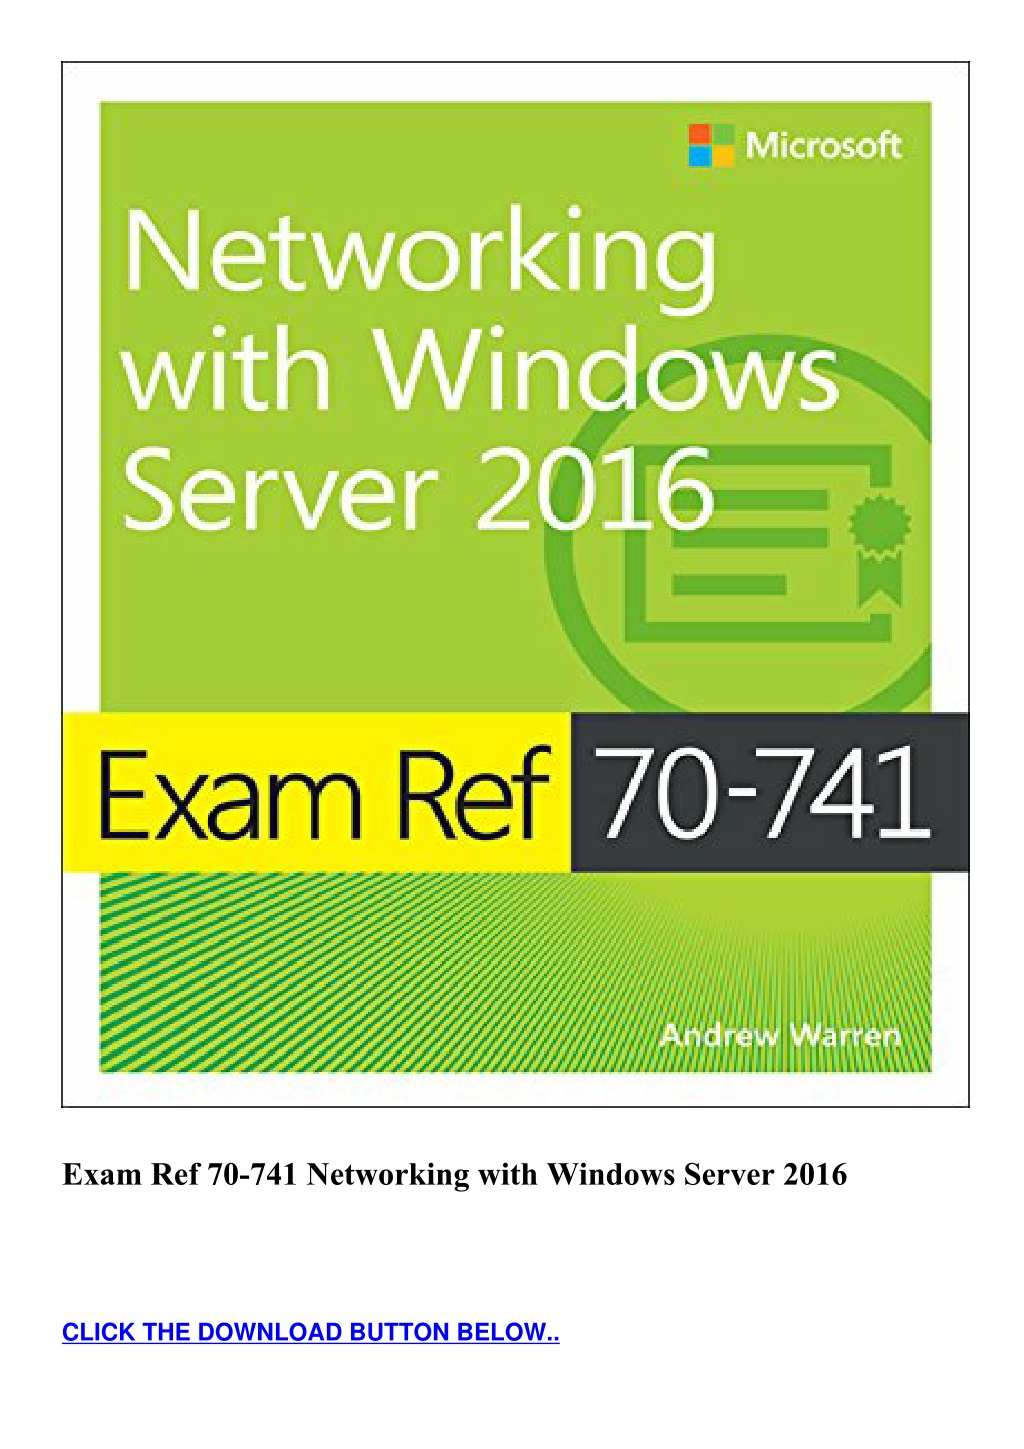 exam ref 70-741 networking with windows server 2016 pdf download